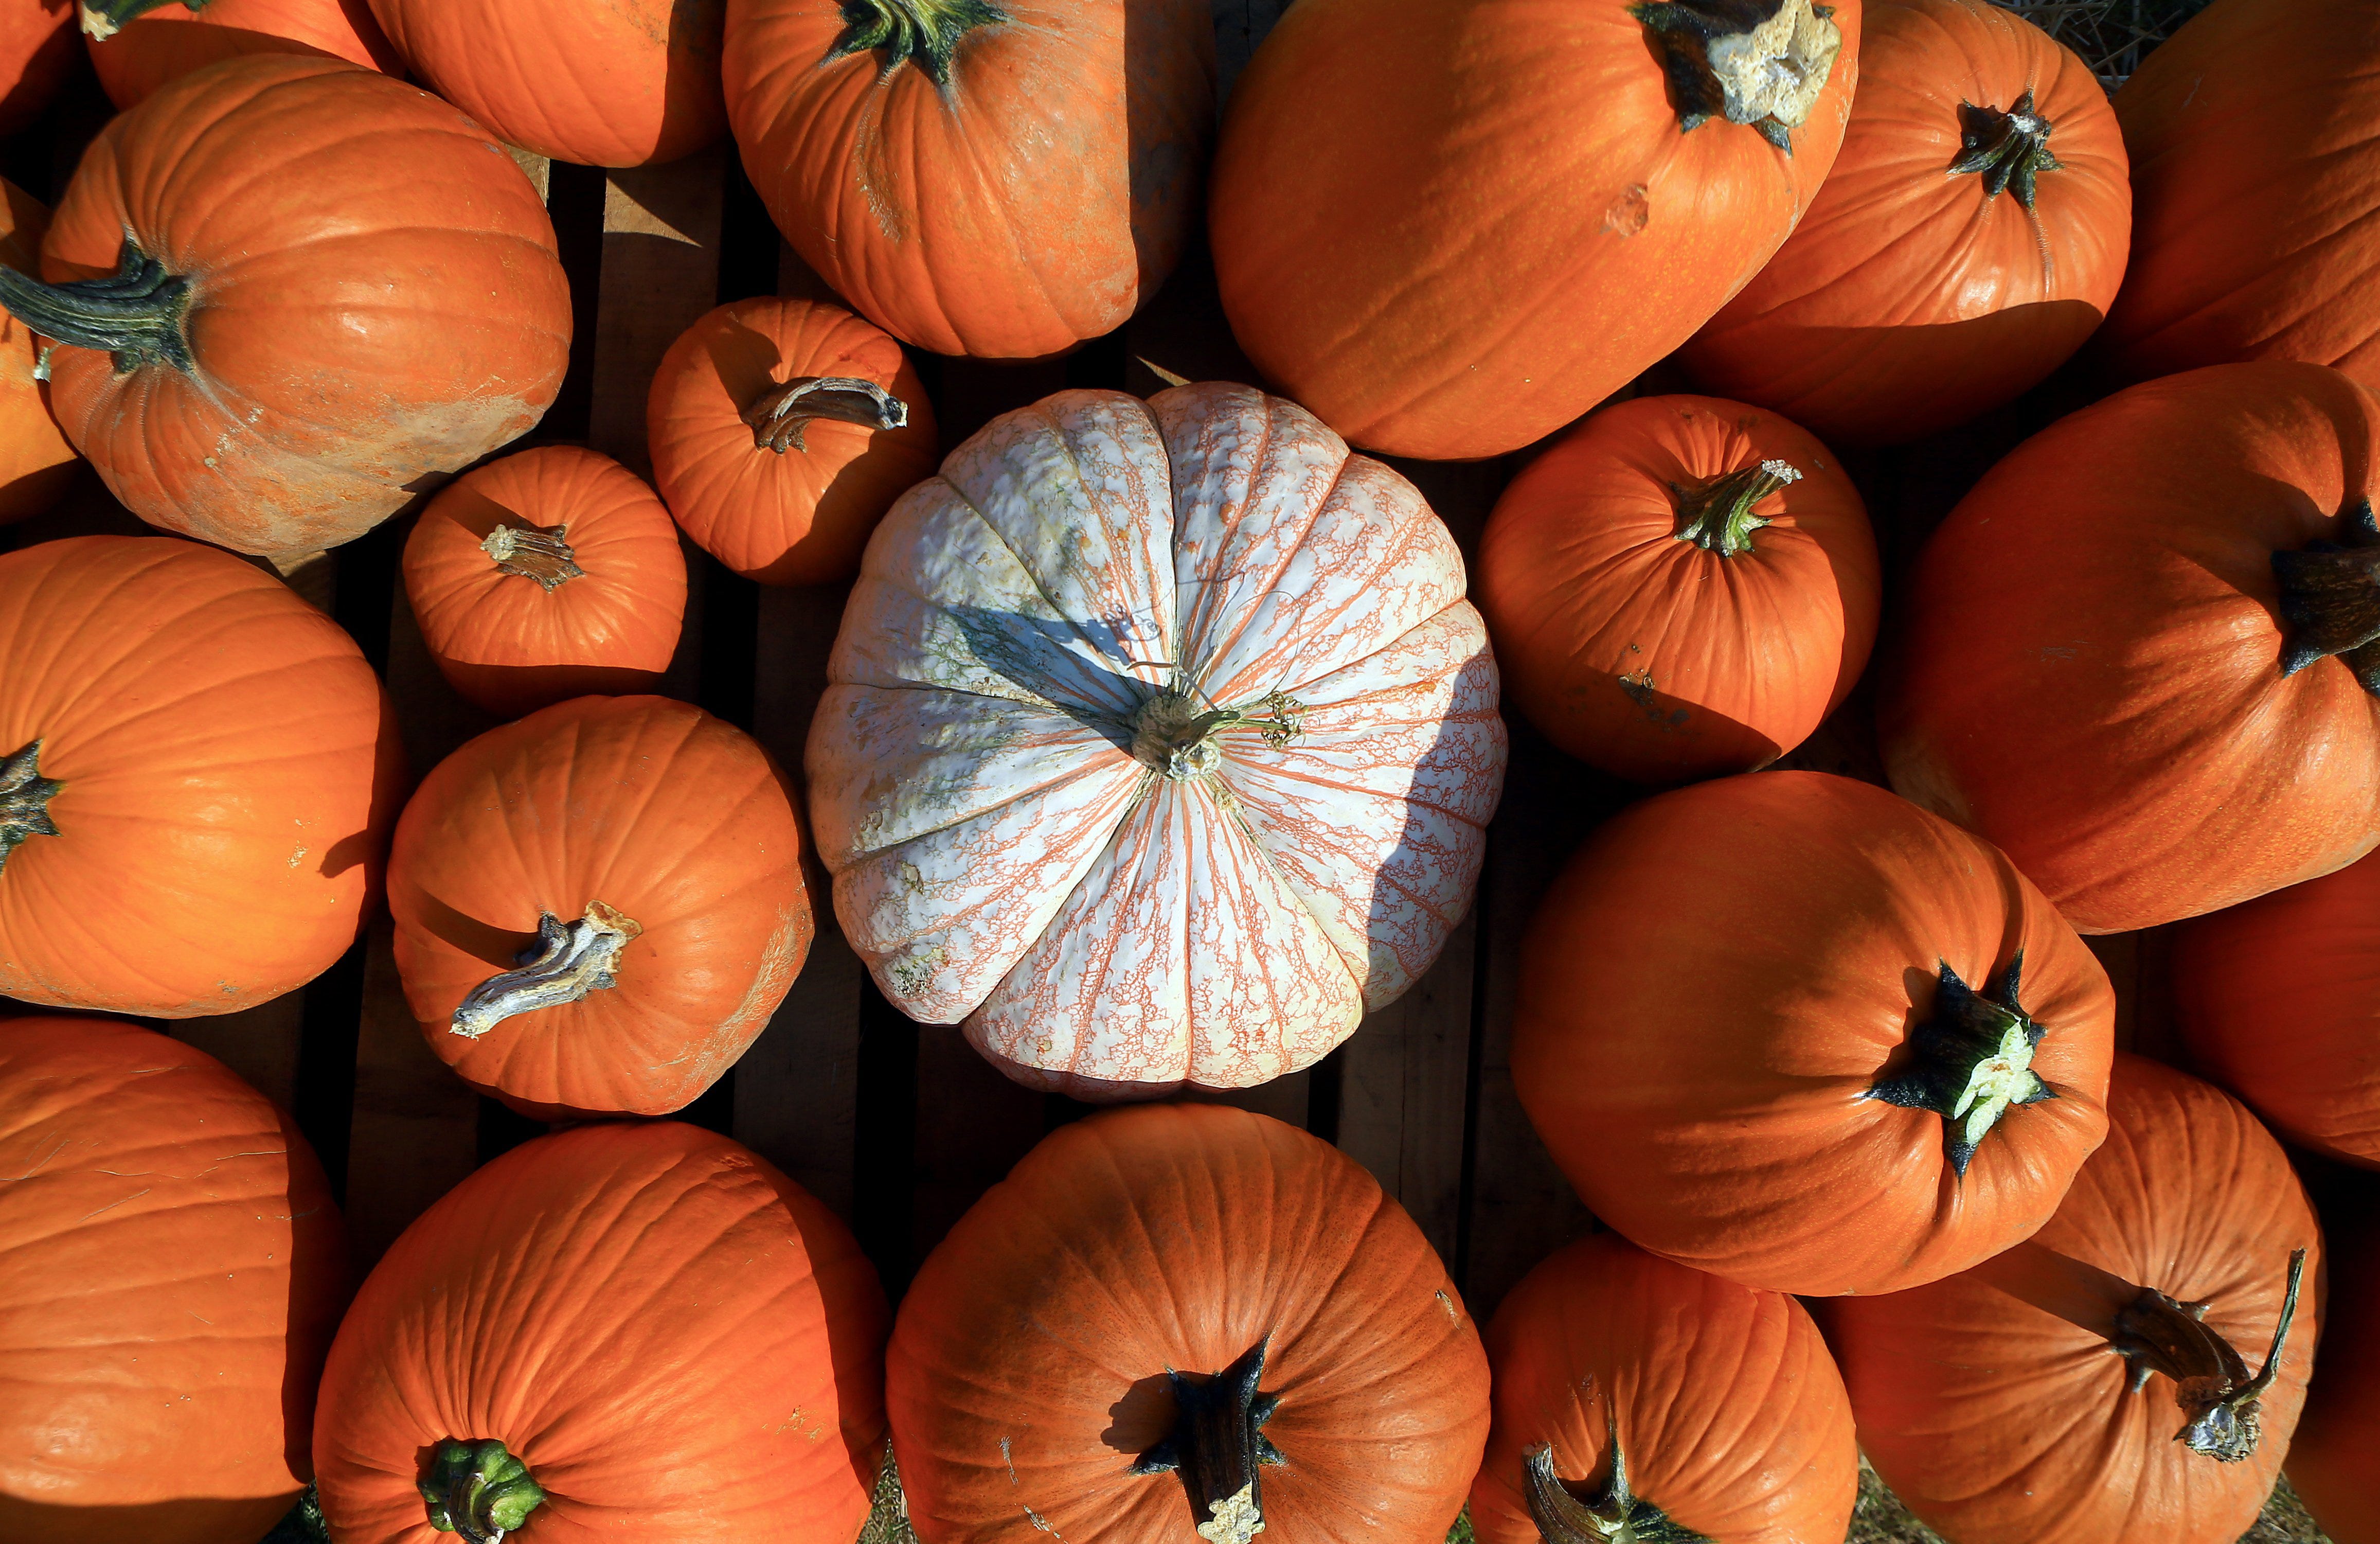 Head out to these pumpkin patches in corpus christi in october